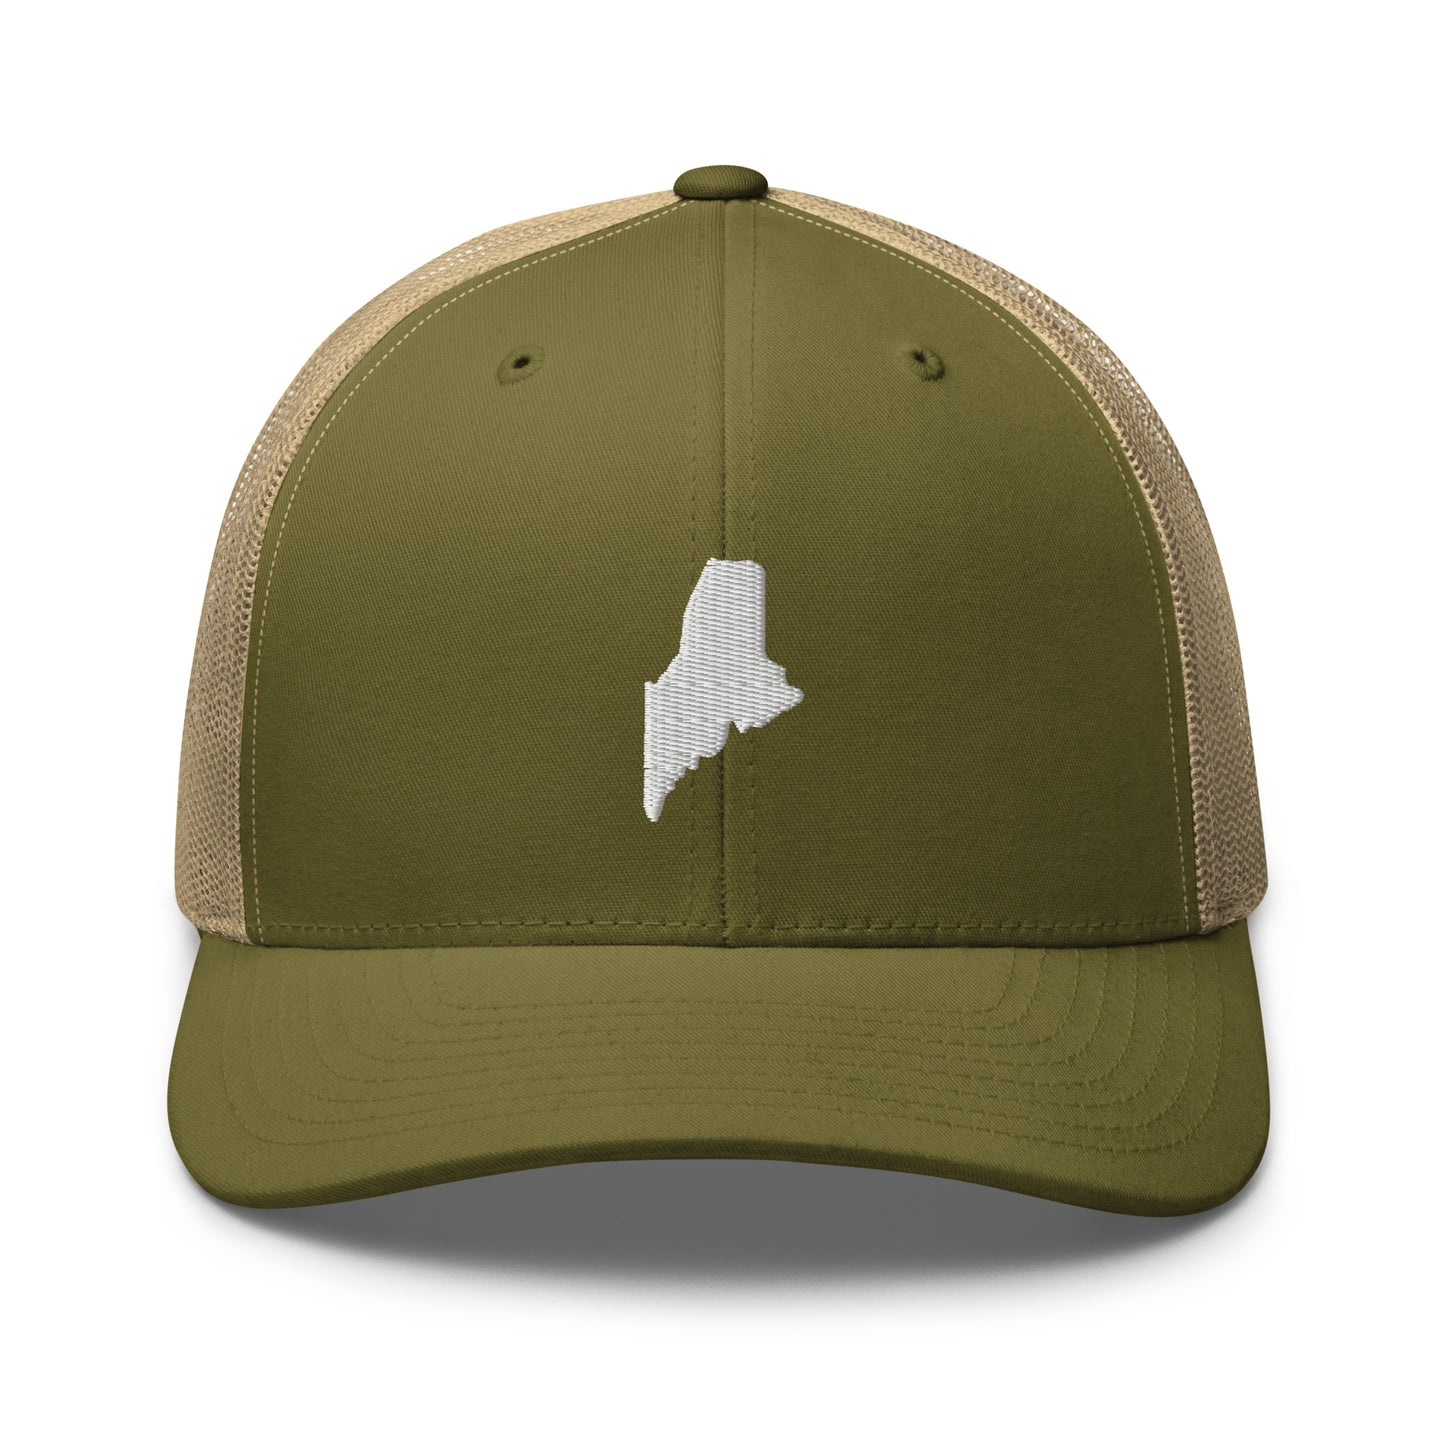 Maine State Silhouette Mid 6 Panel Snapback Trucker Hat